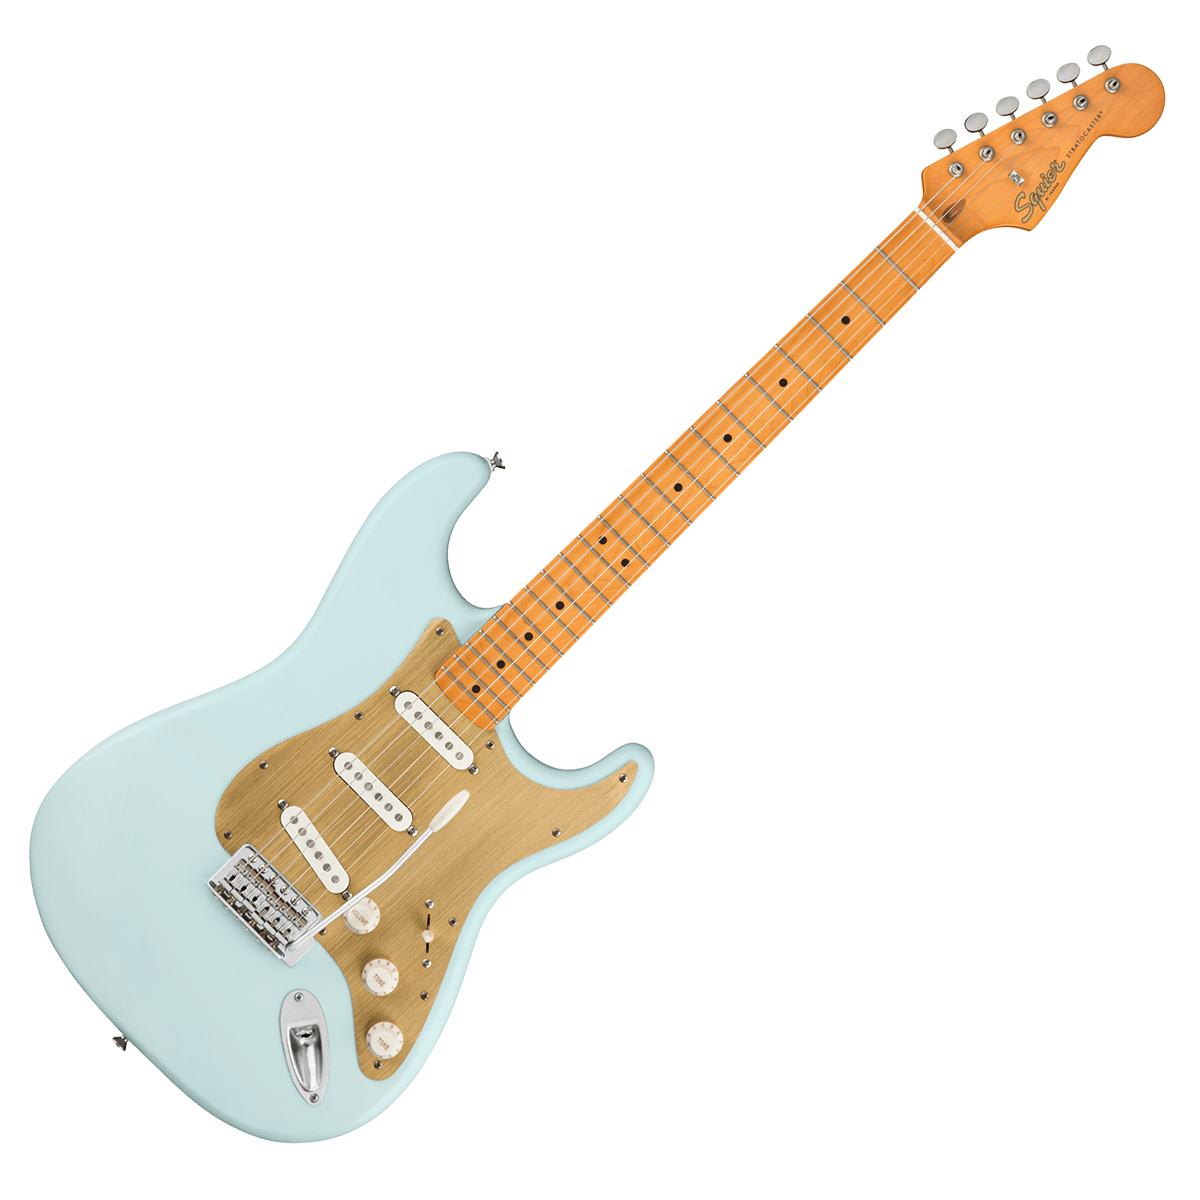 Squier by Fender 40th Anniv. ST SSNB エレキギター 初心者セット 